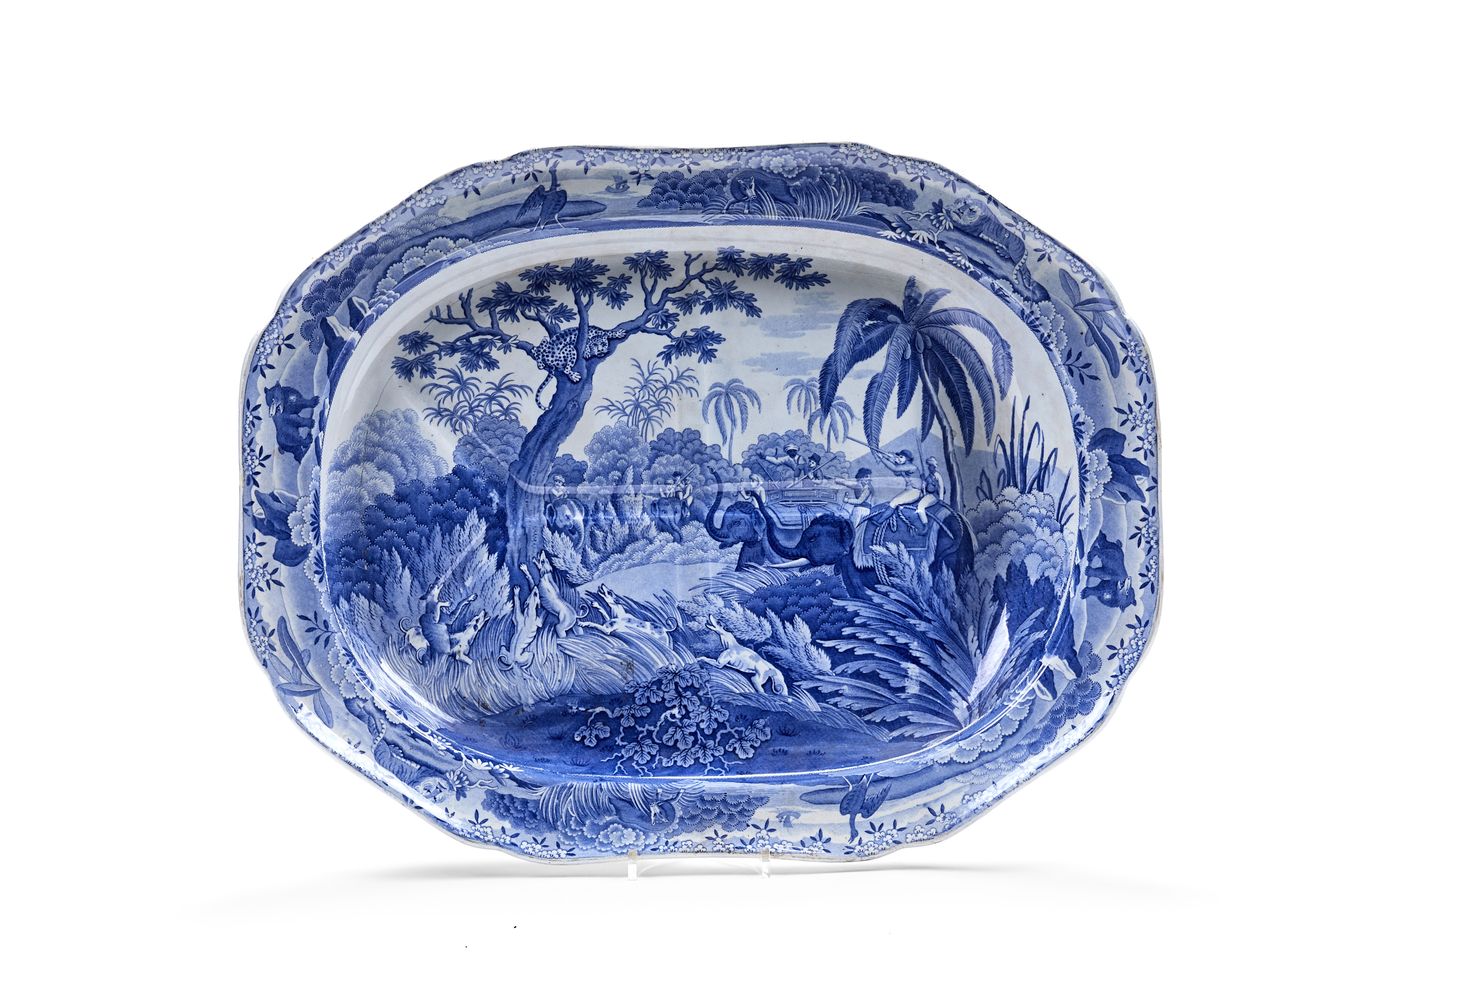 A Spode blue and white pearlware 'well and tree' meat dish from the 'Indian Sporting' Series, circa